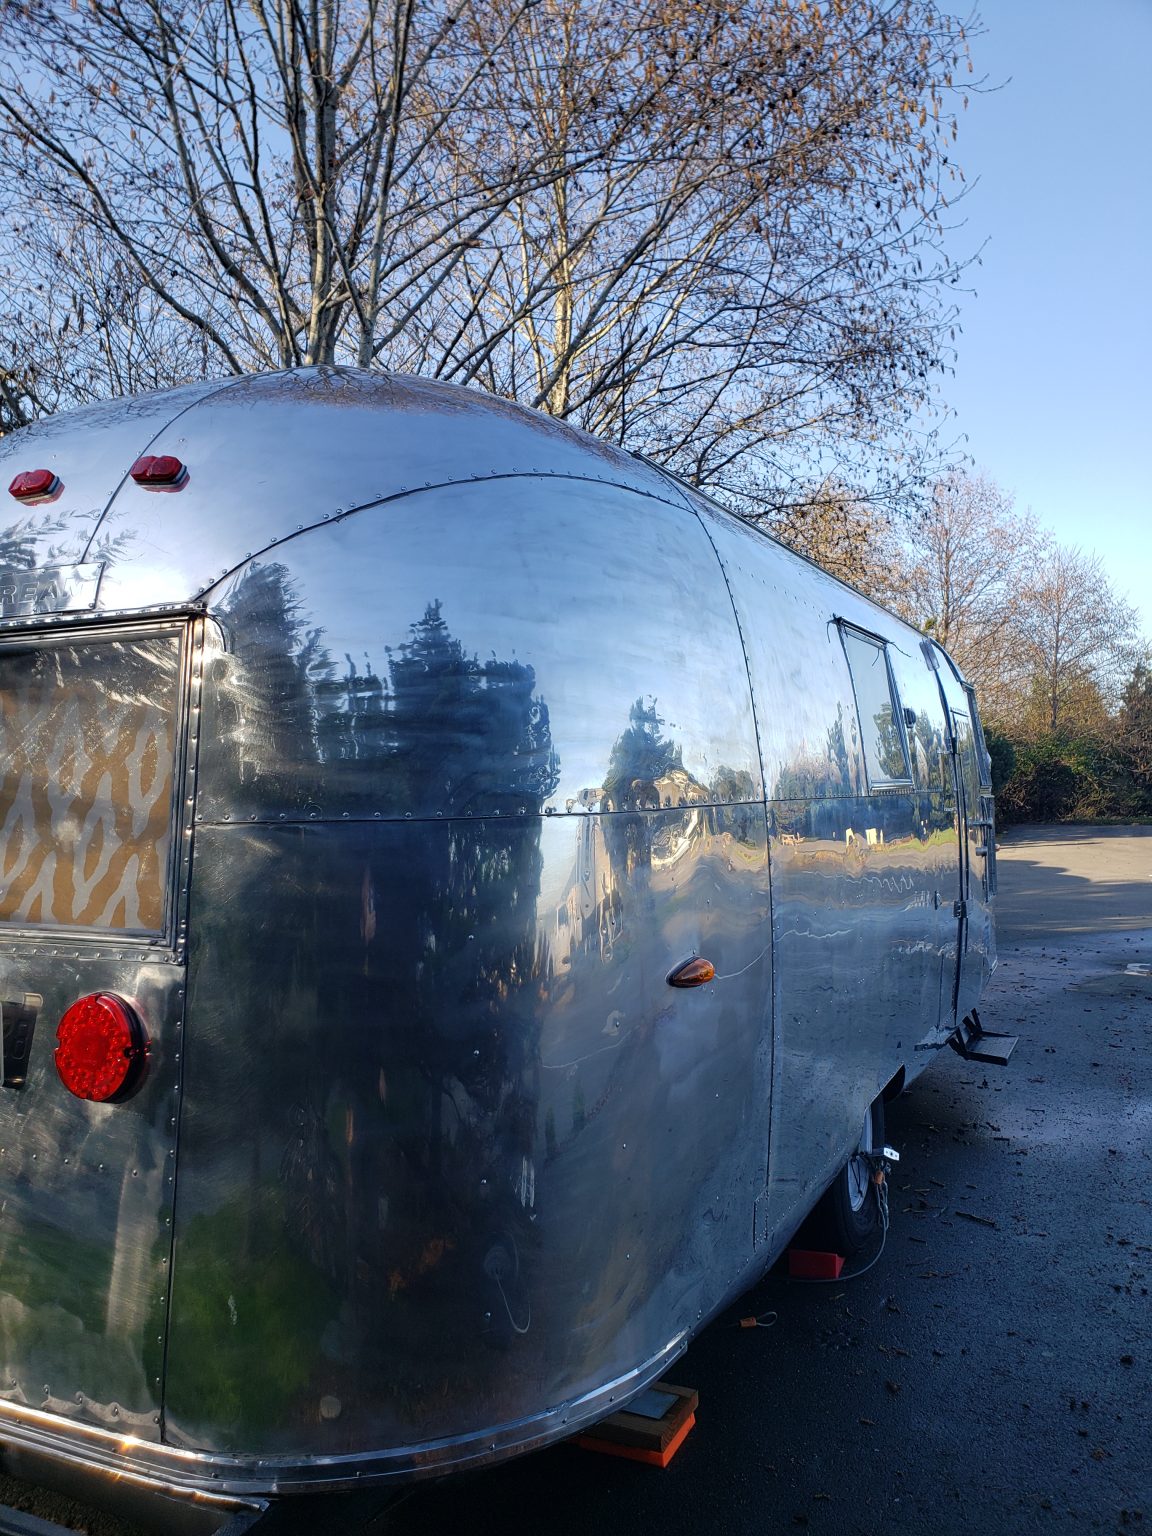 1964 airstream land yacht for sale